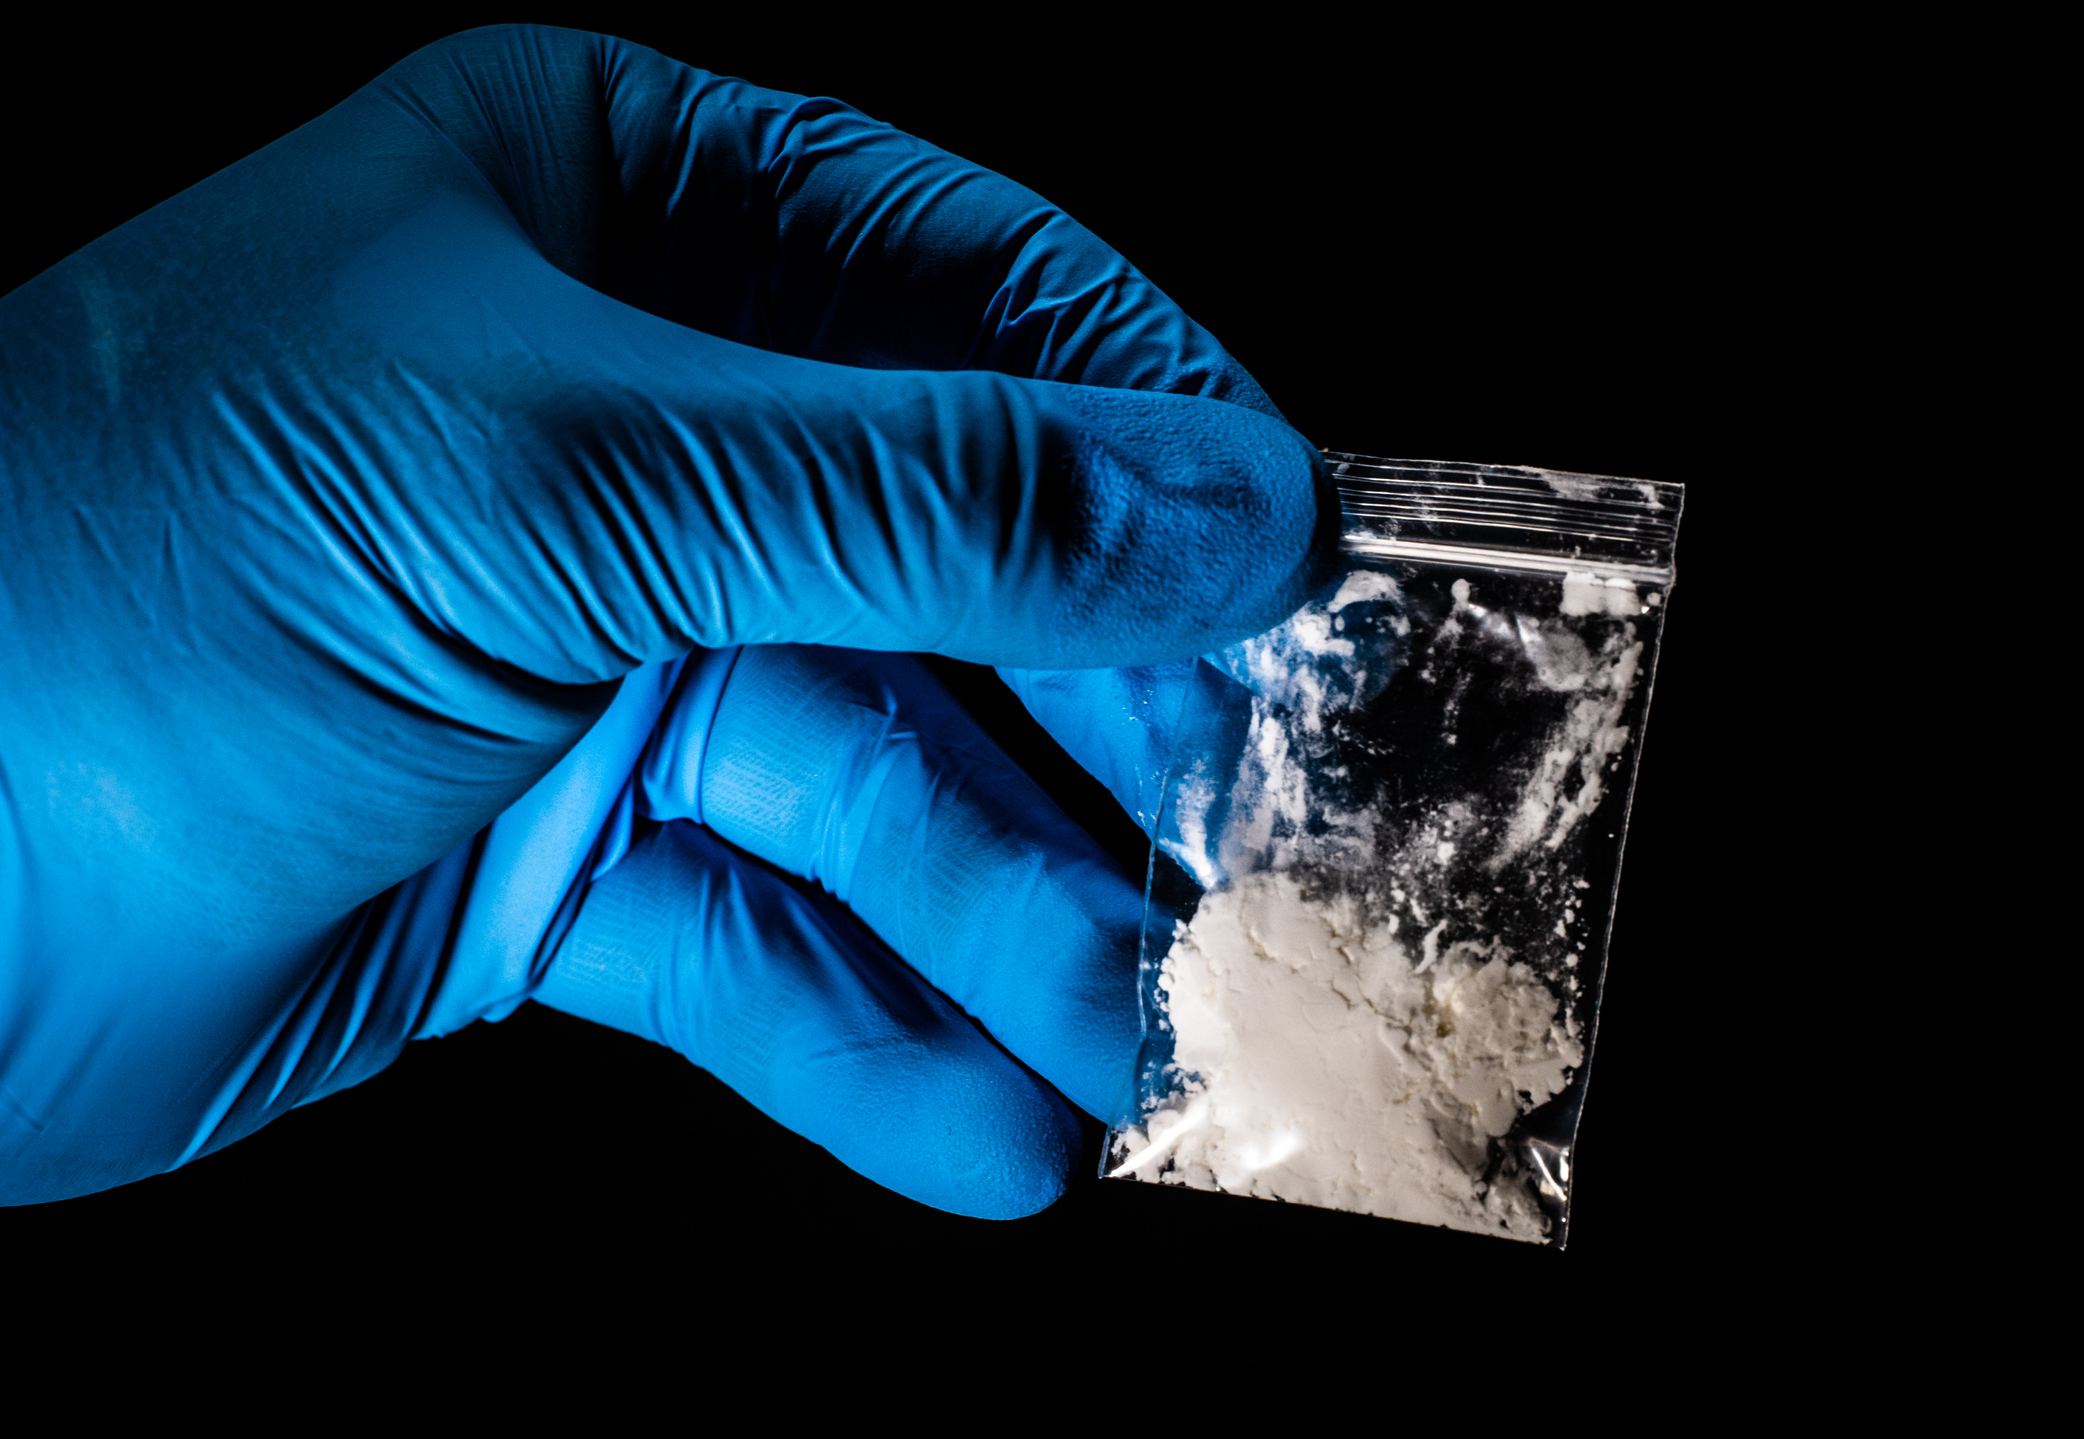 In its powder form, fentanyl resembles most common powdered drugs